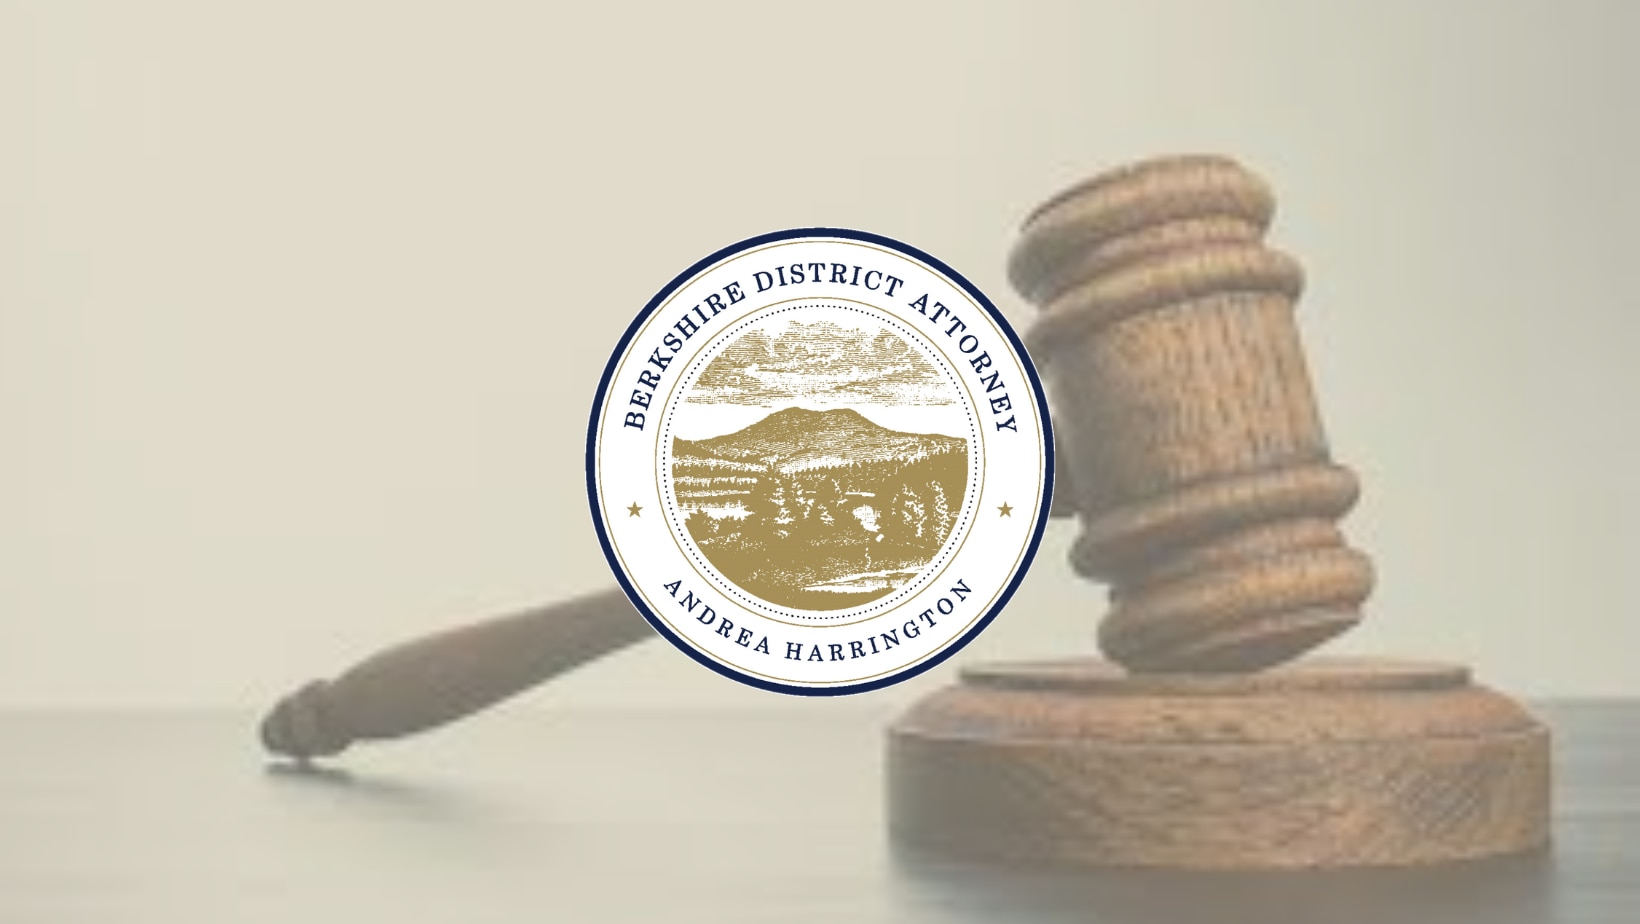 The Berkshire District Attorney's Office's seal.